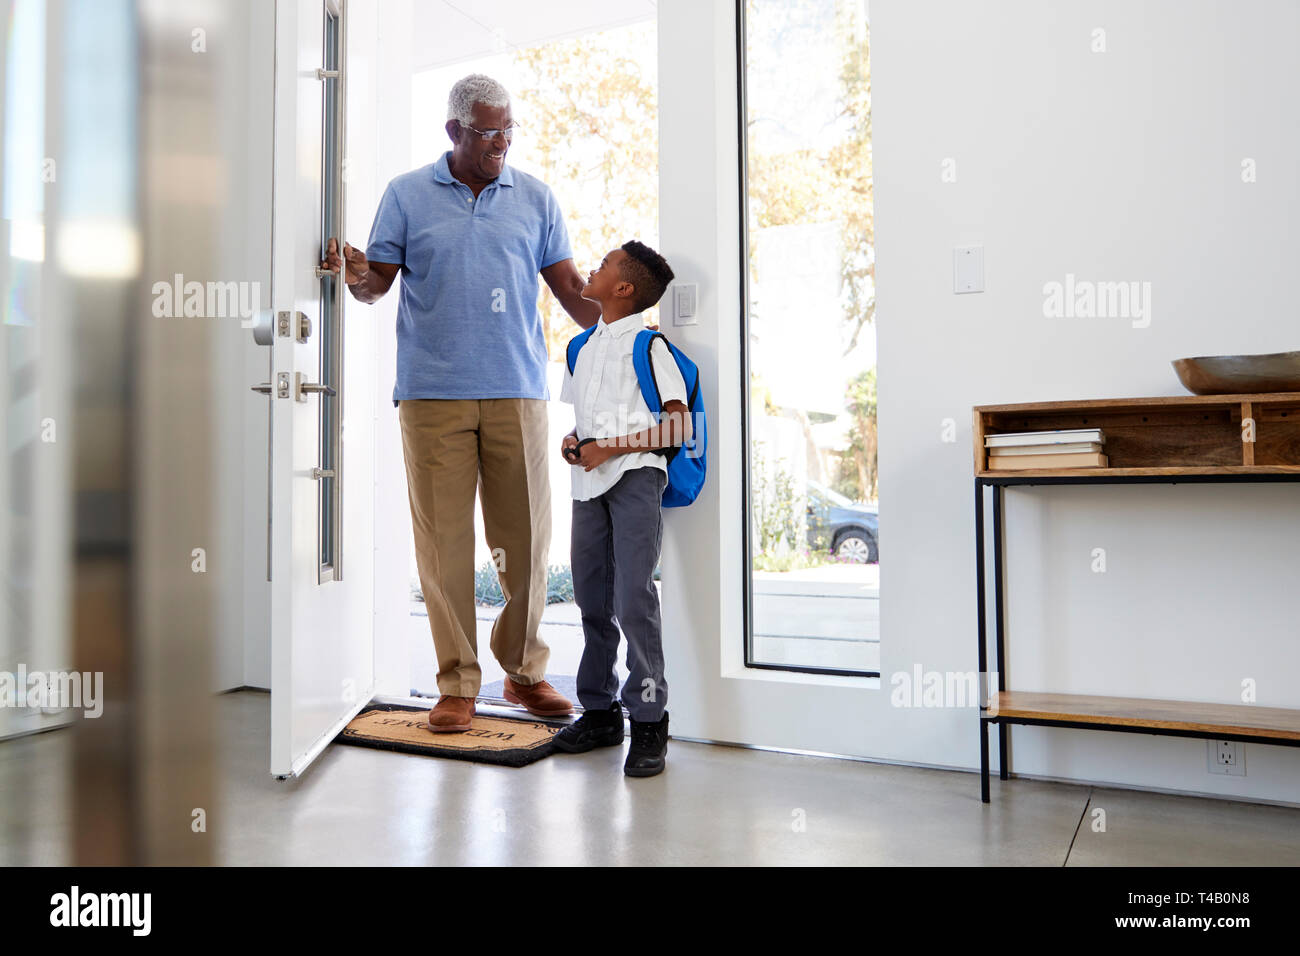 Grandfather Collecting And Bringing Grandson Home After School Stock Photo